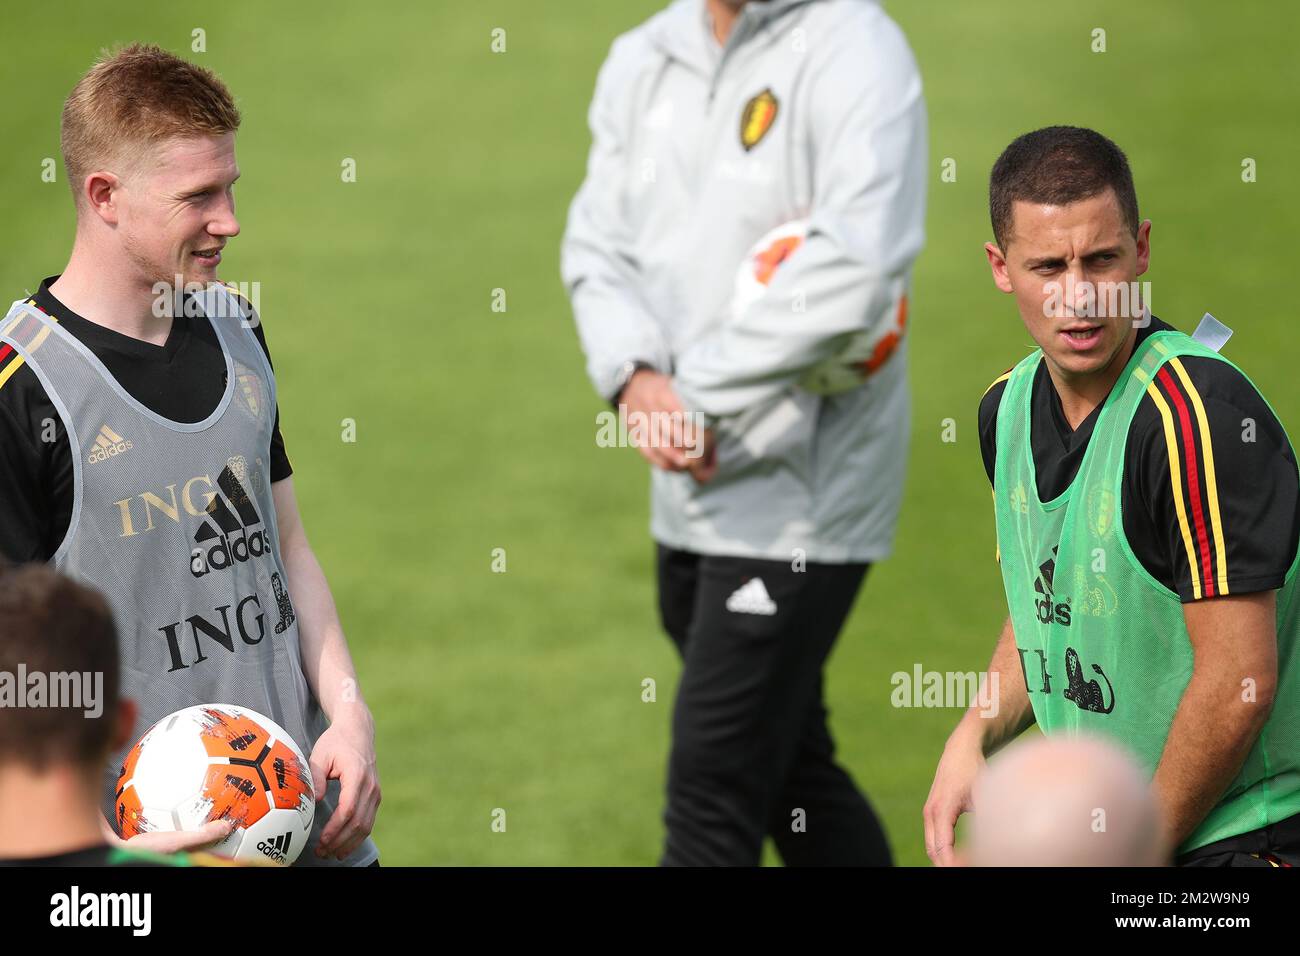 Belgium's Kevin De Bruyne and Belgium's captain Eden Hazard pictured during a training session of Belgian national soccer team the Red Devils, Tuesday 04 June 2019. The team will be playing two European Cup 2020 qualification games against Kazachstan and Scotland in Belgium. BELGA PHOTO BRUNO FAHY Stock Photo